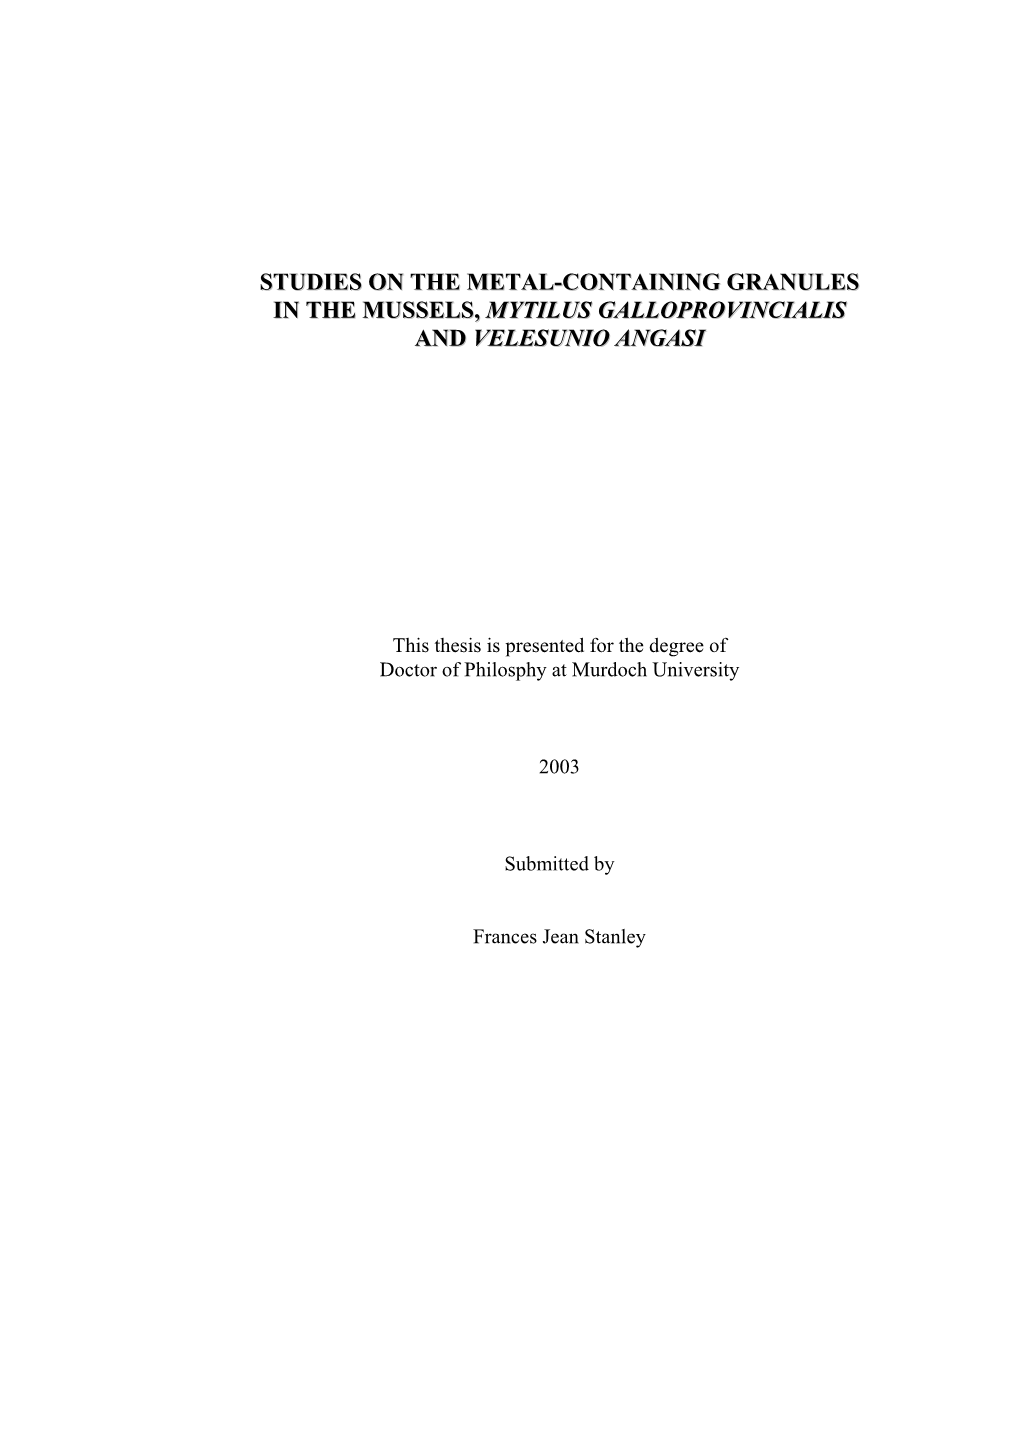 Studies on the Metal-Containing Granules in the Mussels, Mytilus Galloprovincialis and Velesunio Angasi